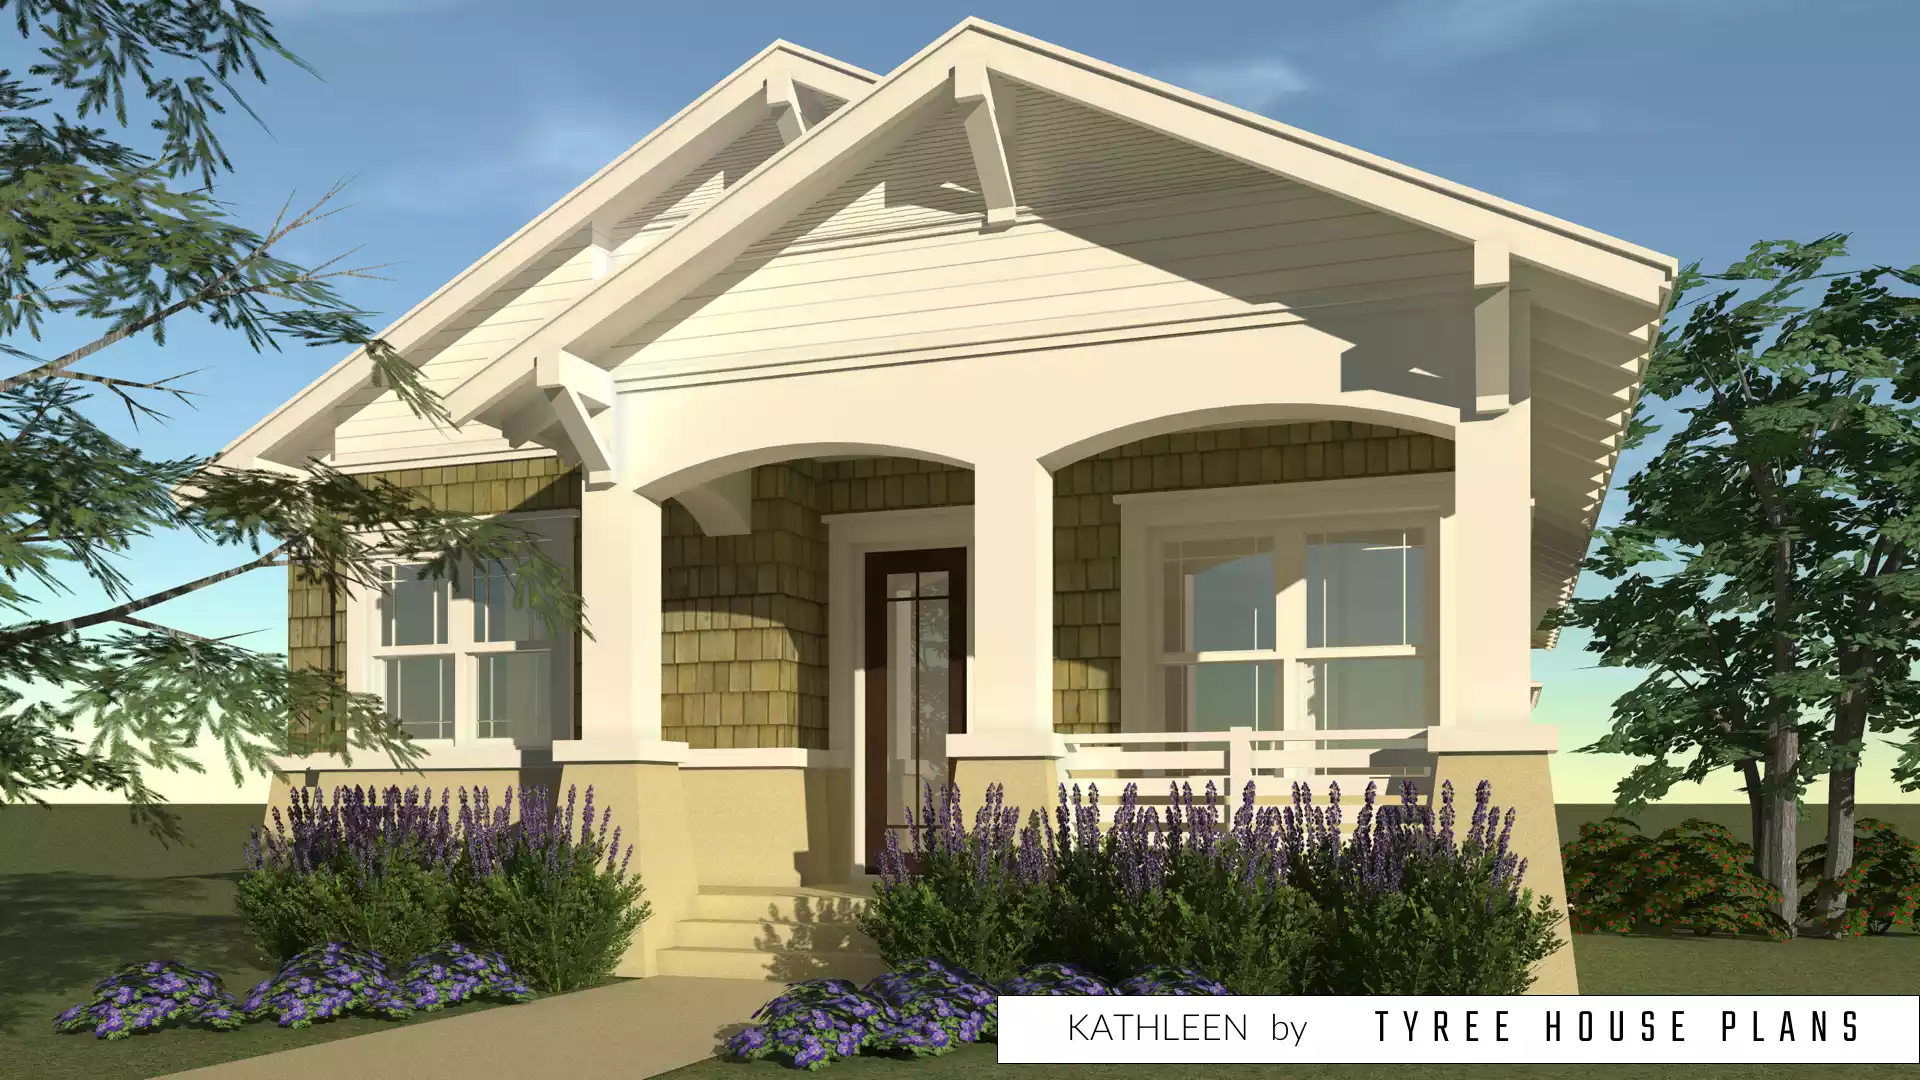 Kathleen by Tyree House Plans.